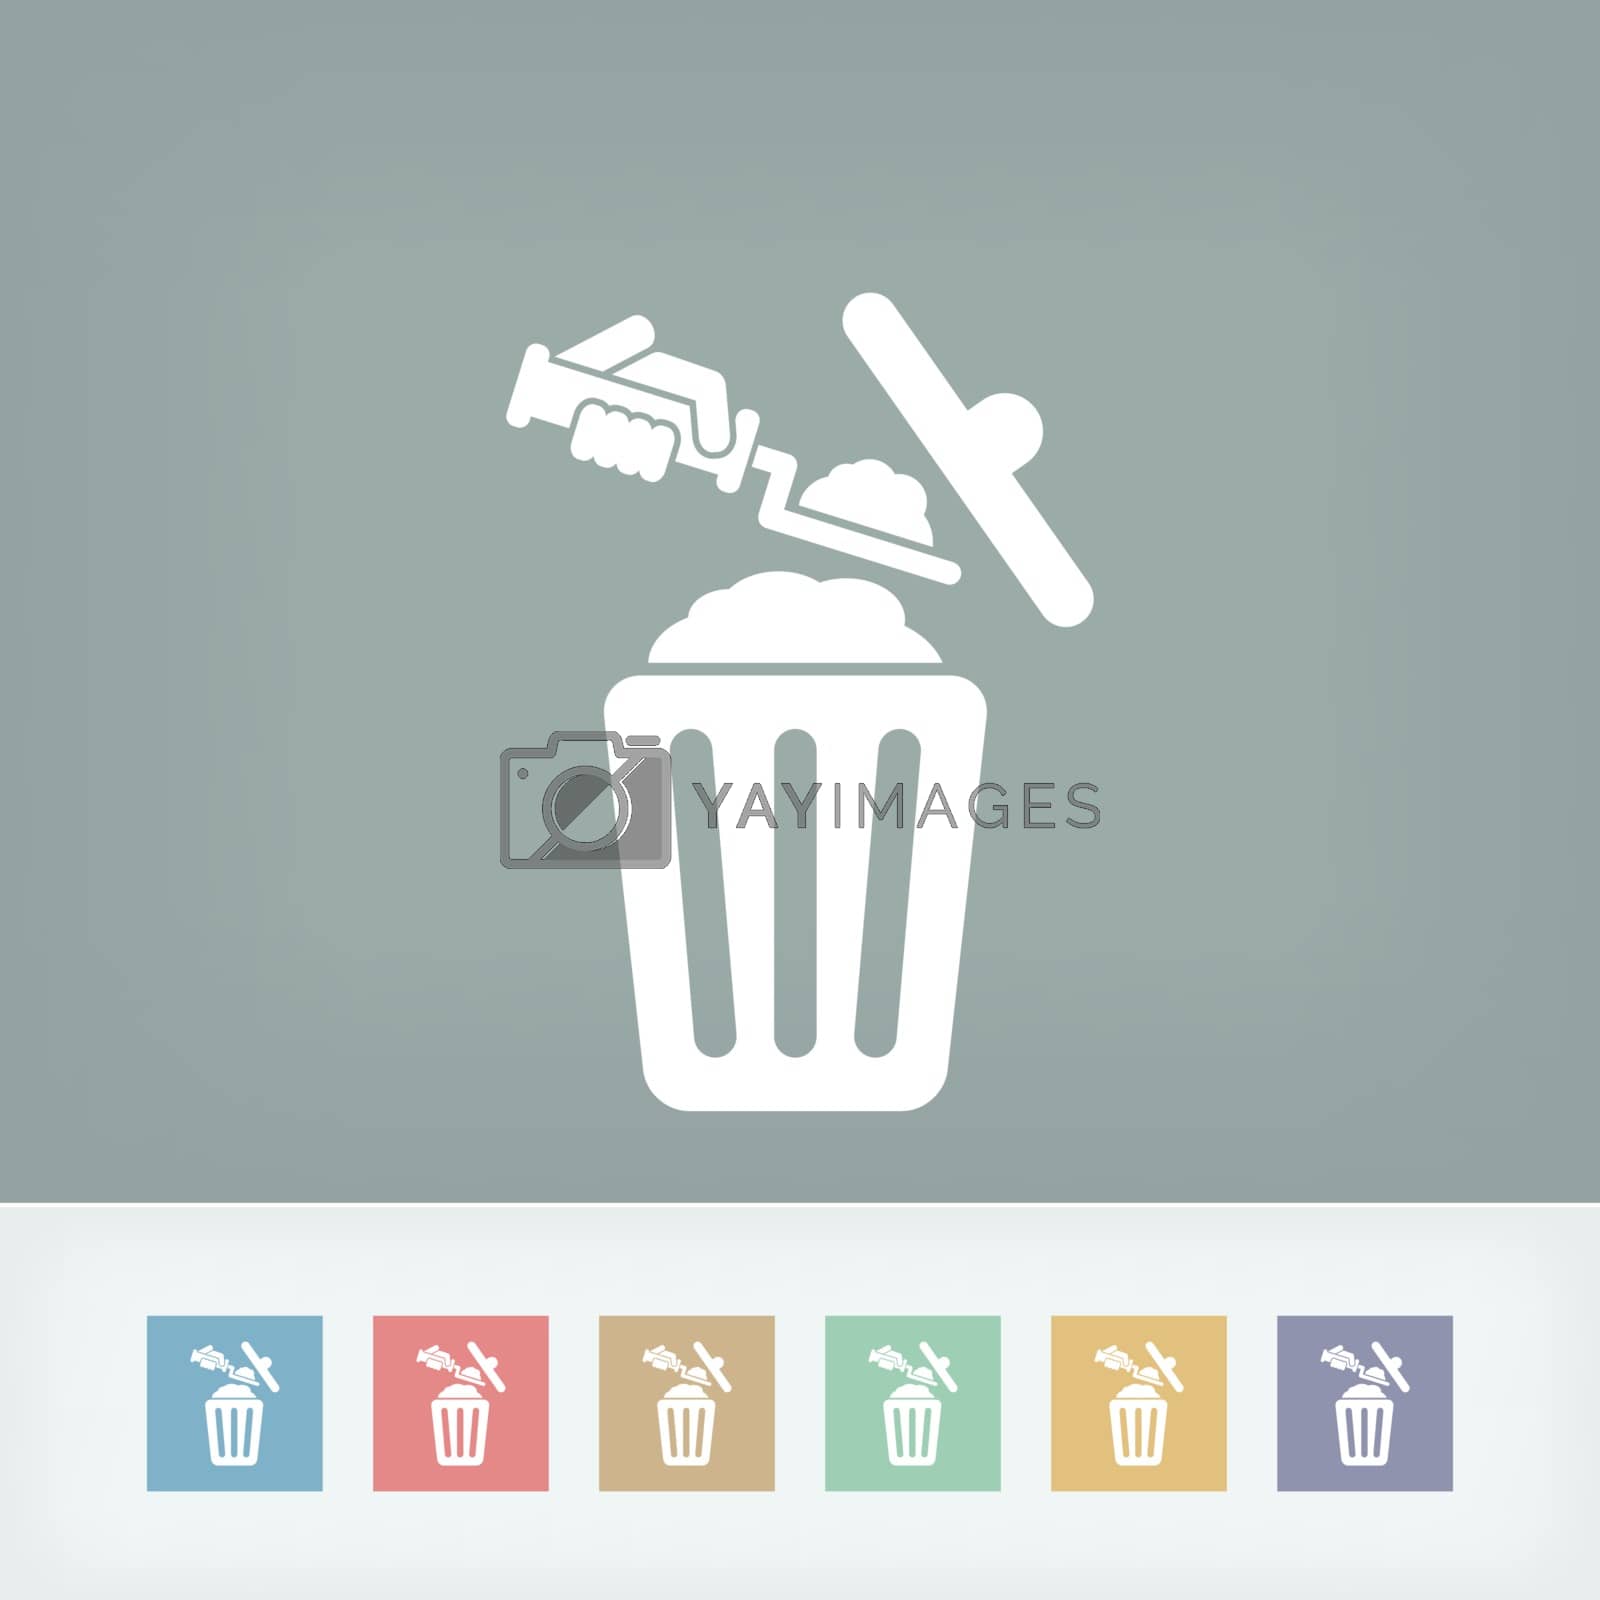 Royalty free image of Disposal of construction materials by myVector